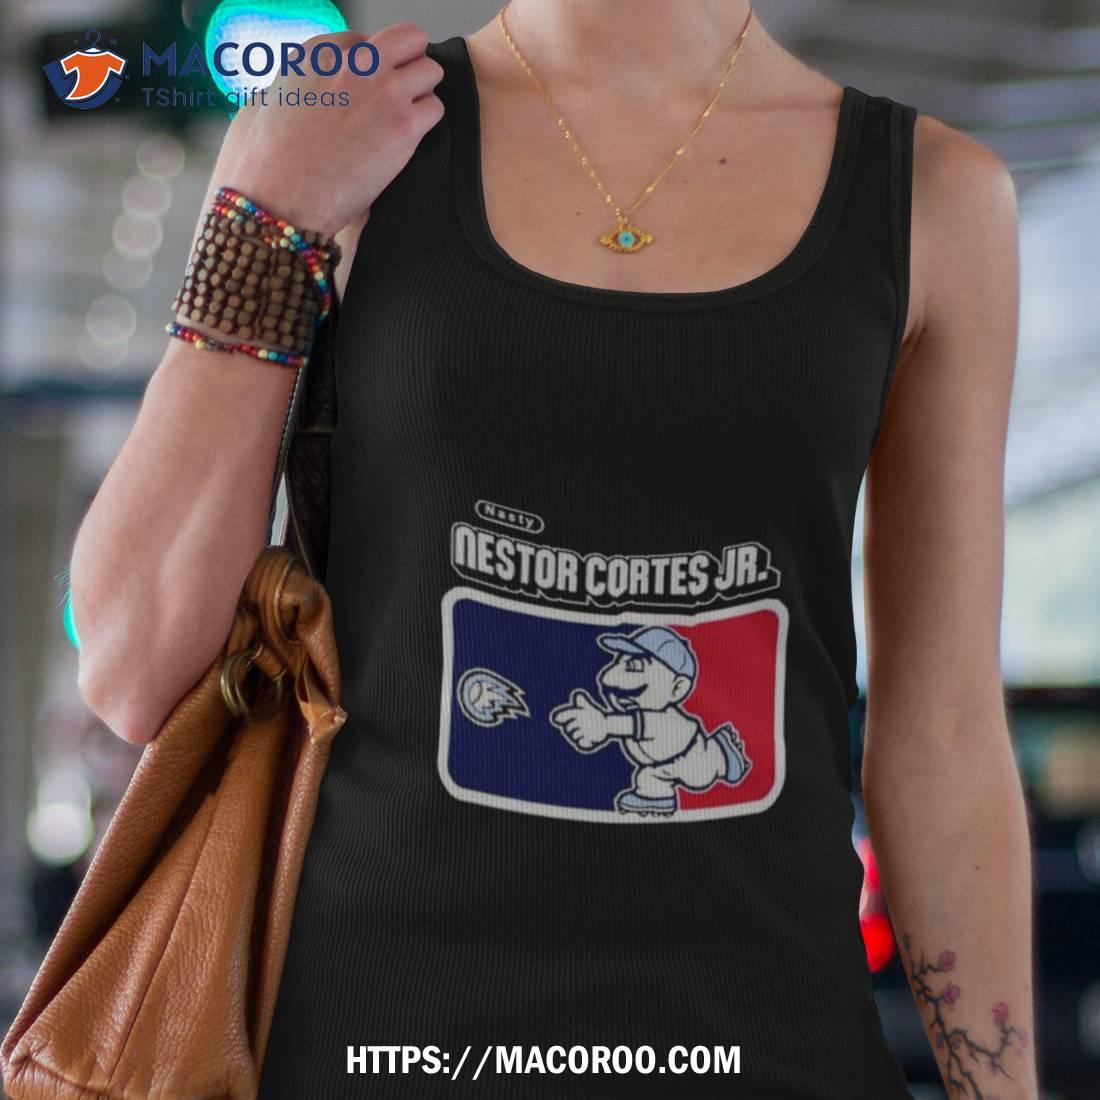 Nestor Cortes Gifts & Merchandise for Sale